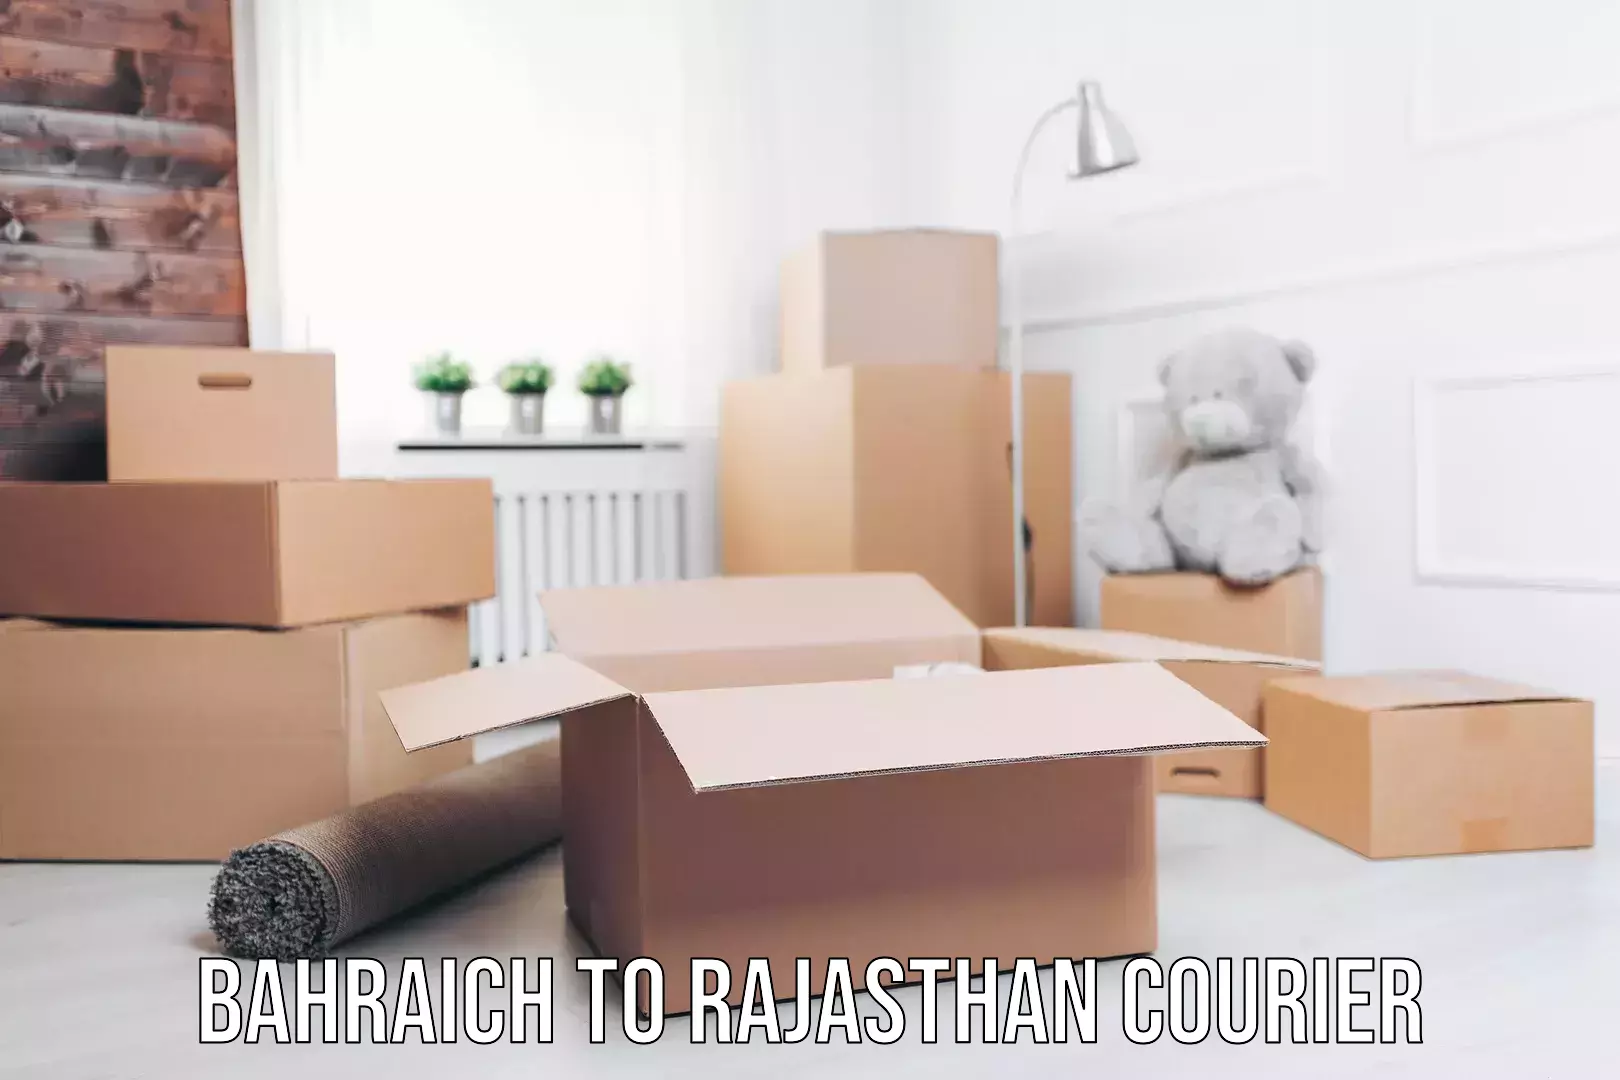 Global shipping solutions Bahraich to Rajasthan